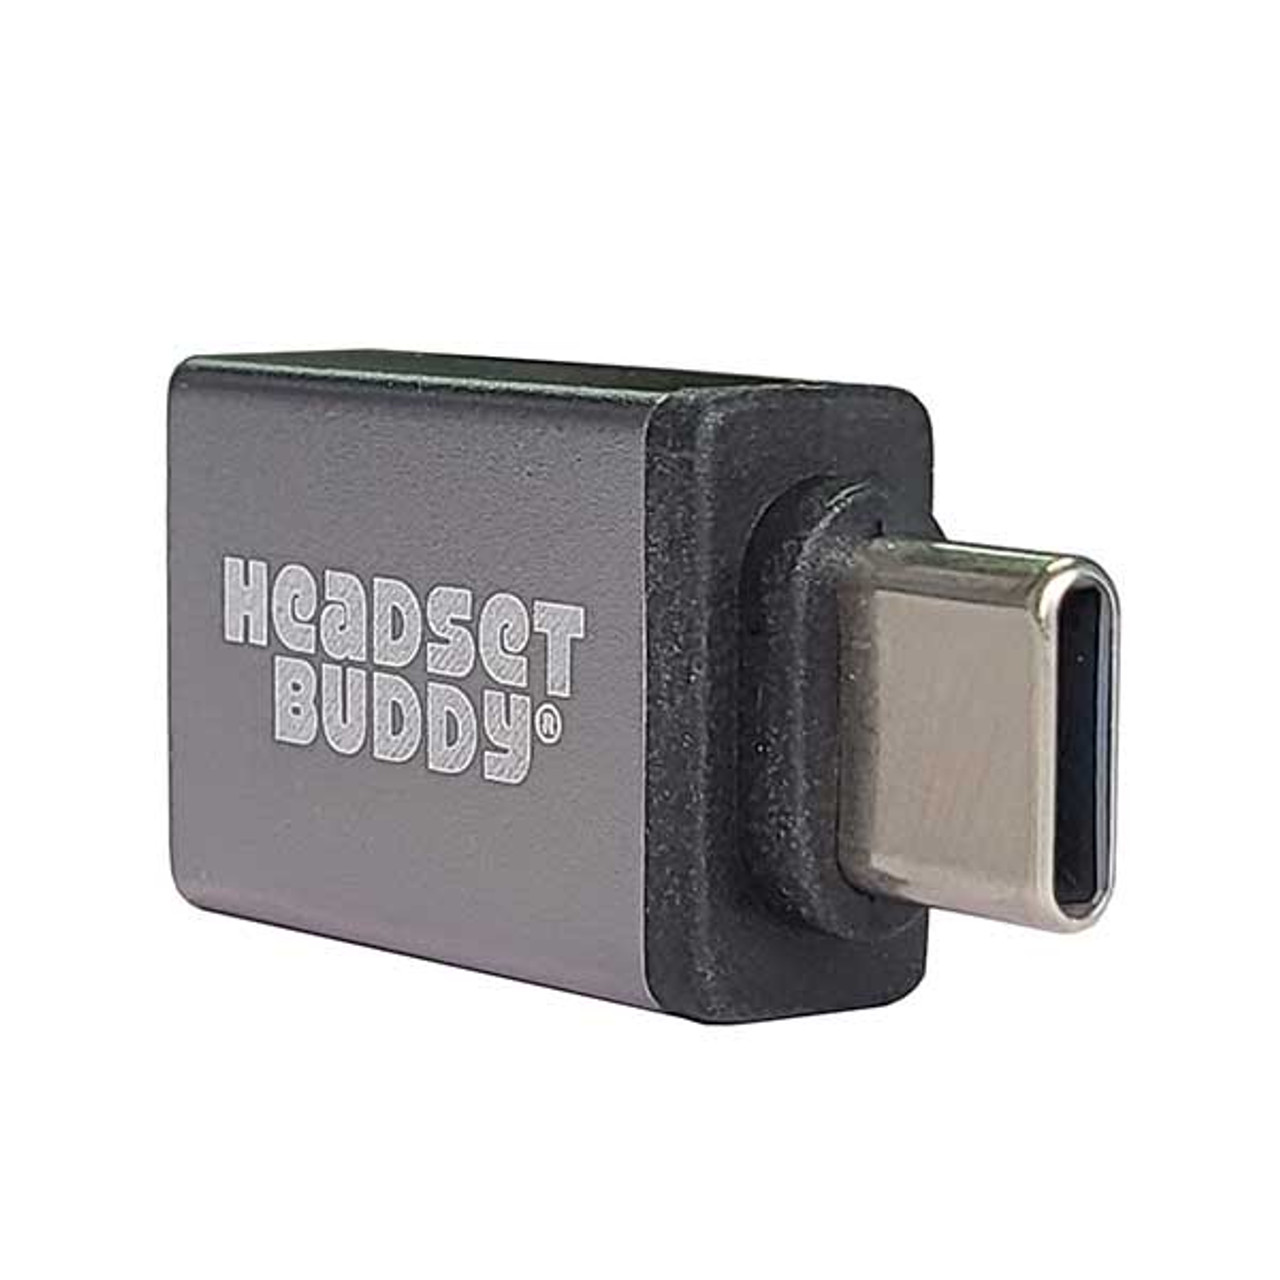 Headset Buddy USB-A to USB-C Adapter - USB Male to USB3 Female Adapter for Type C or Thunderbolt Devices